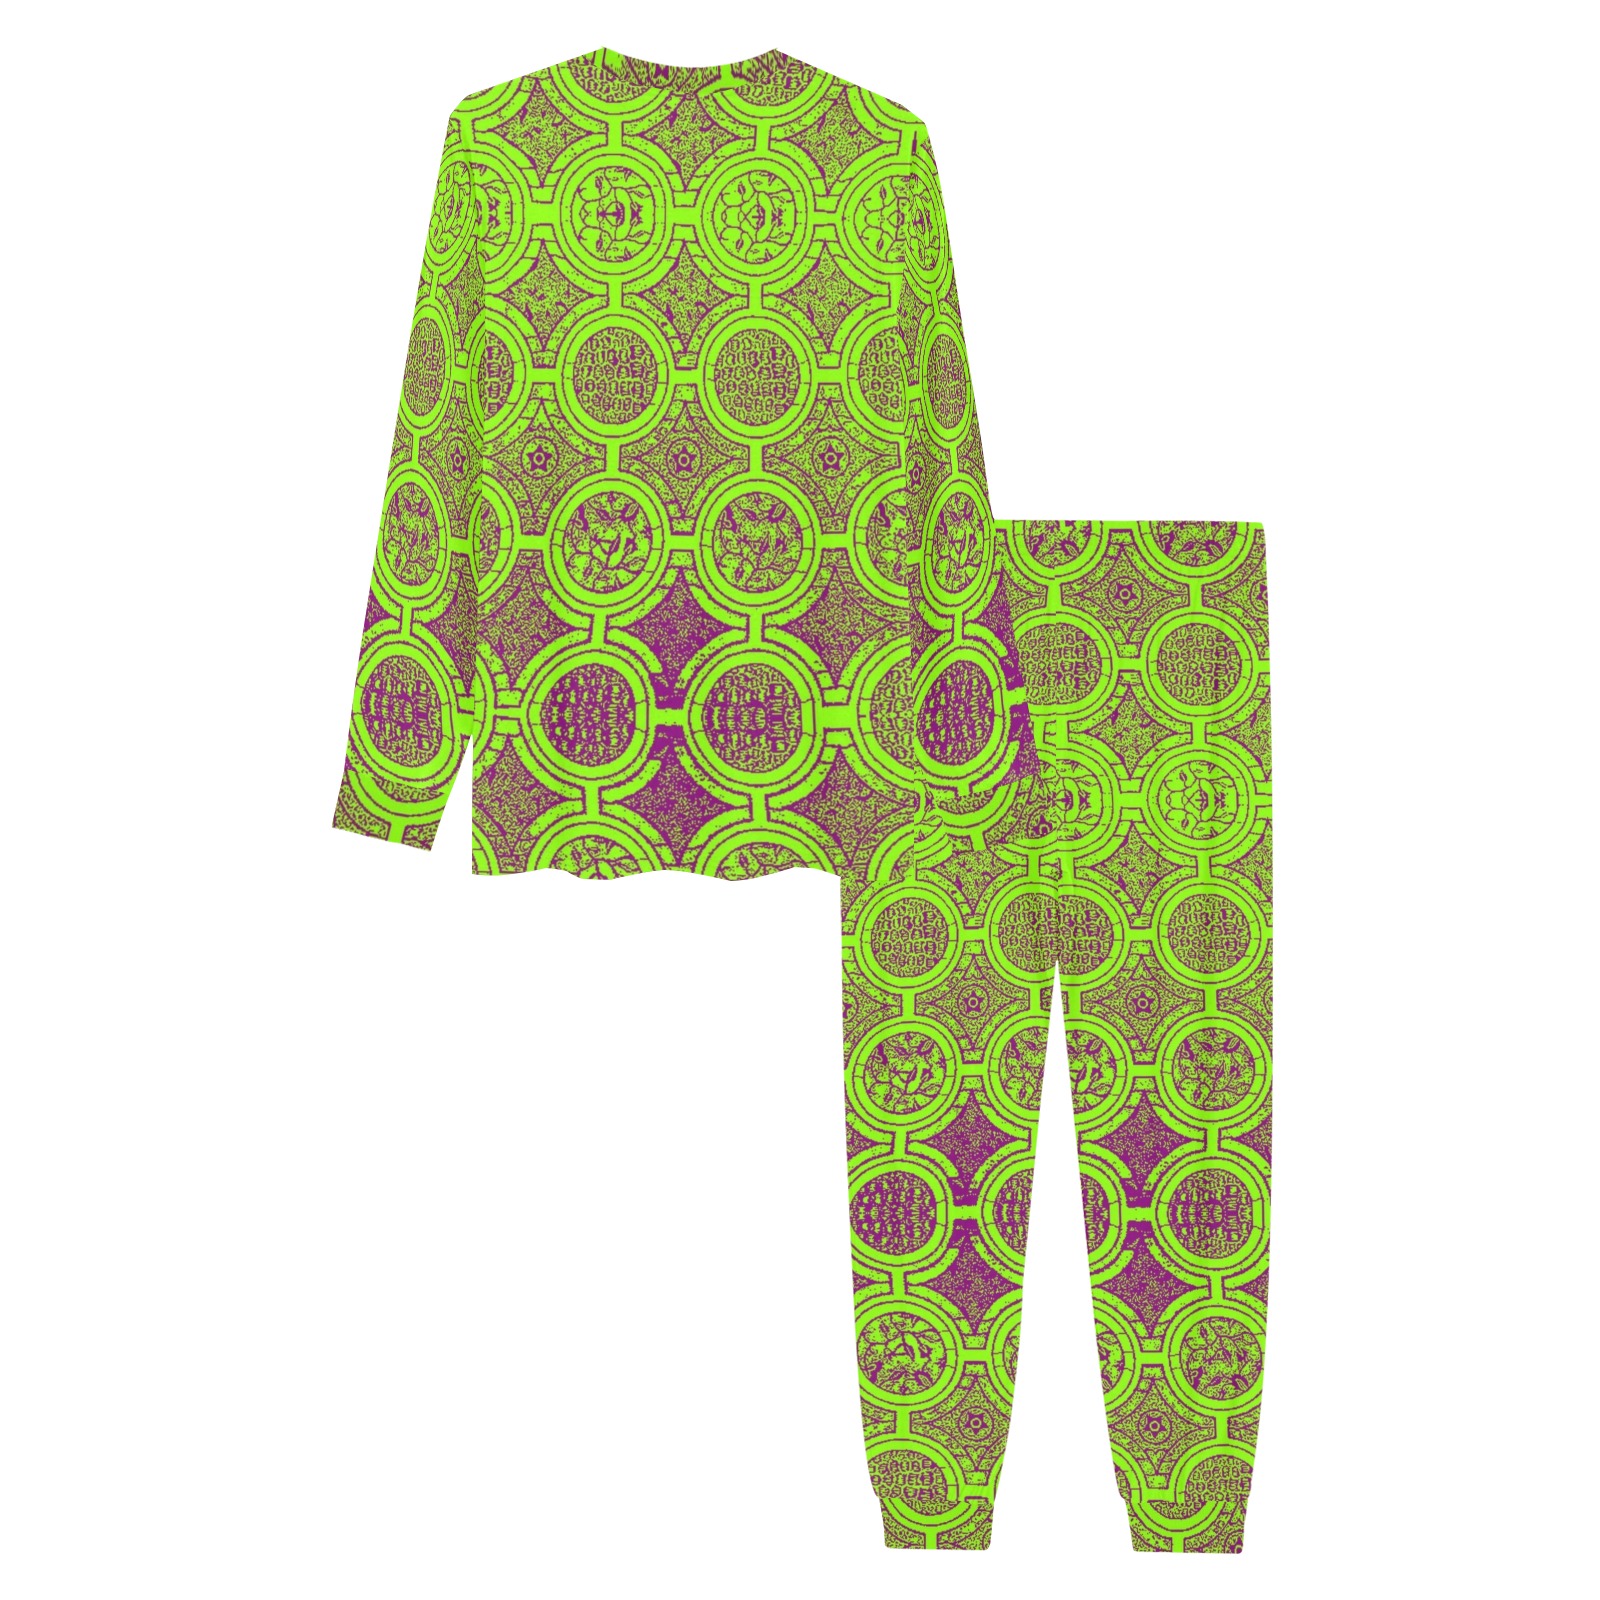 AFRICAN PRINT PATTERN 2 Men's All Over Print Pajama Set with Custom Cuff